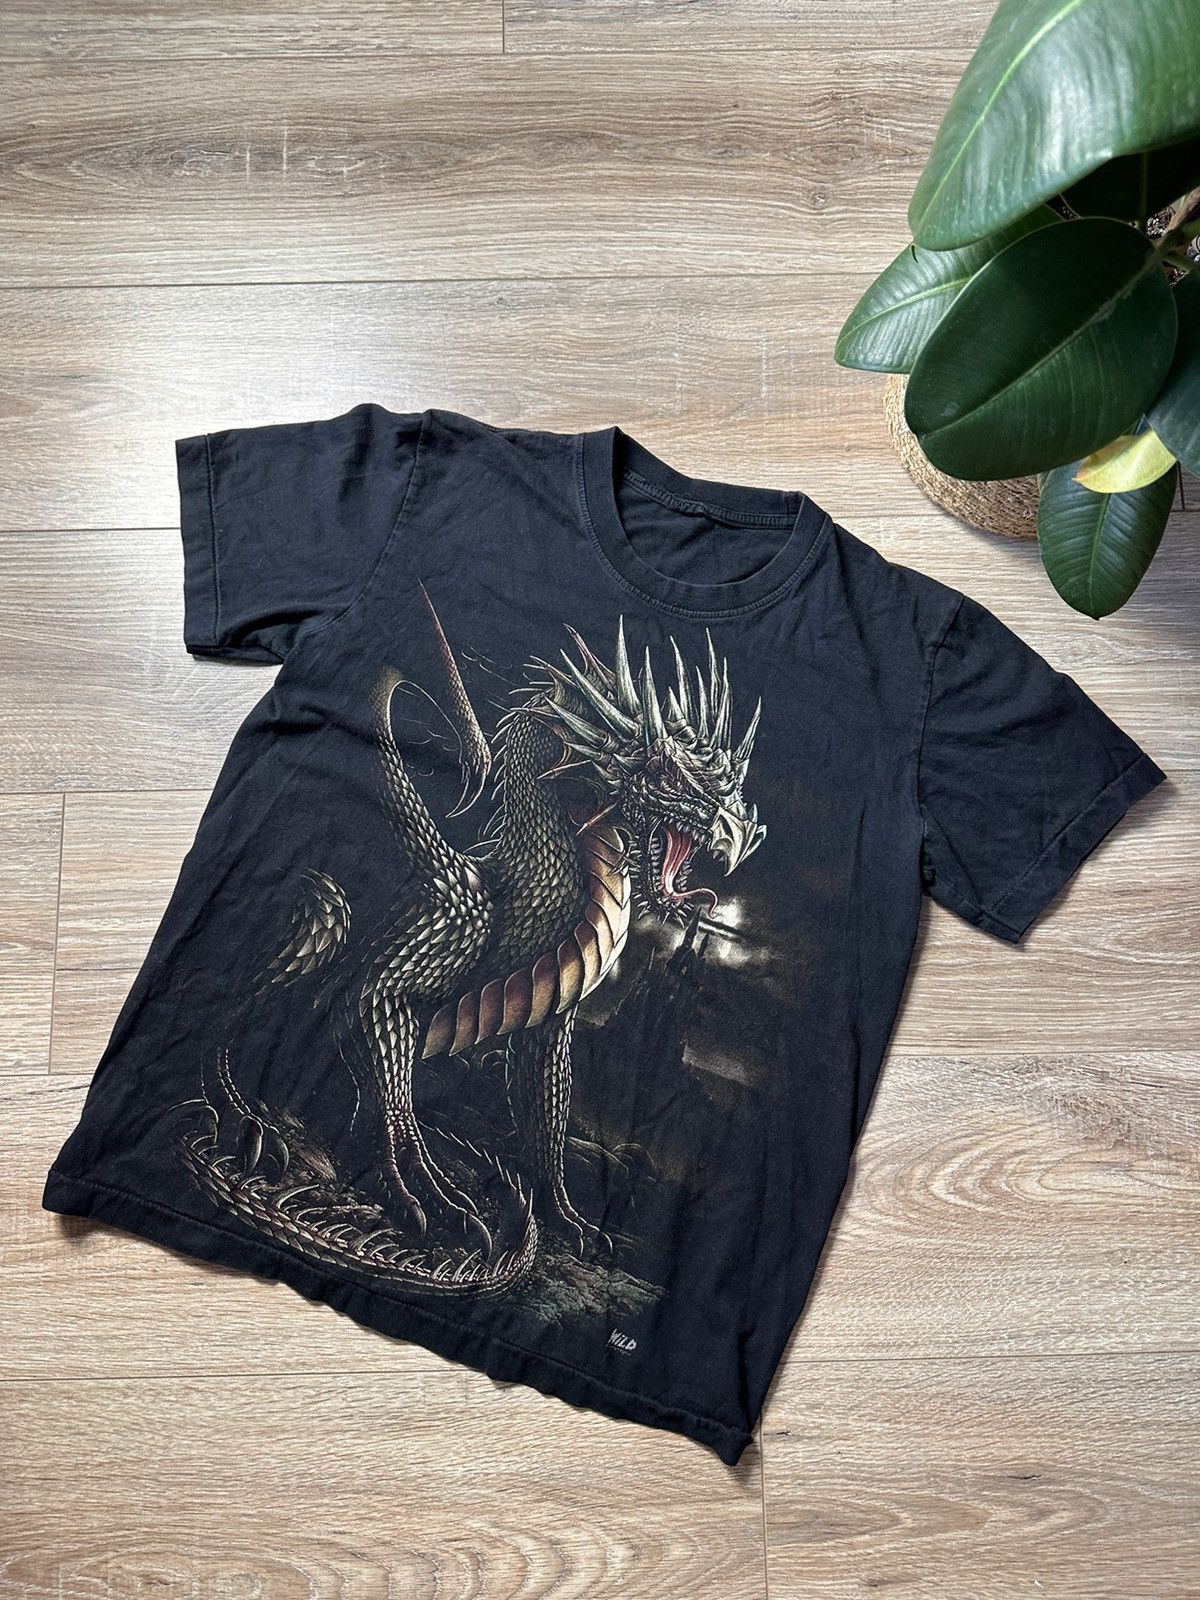 Pre-owned Rock Band Vintage 90's Japanese Dragon Wild T-shirt In Black